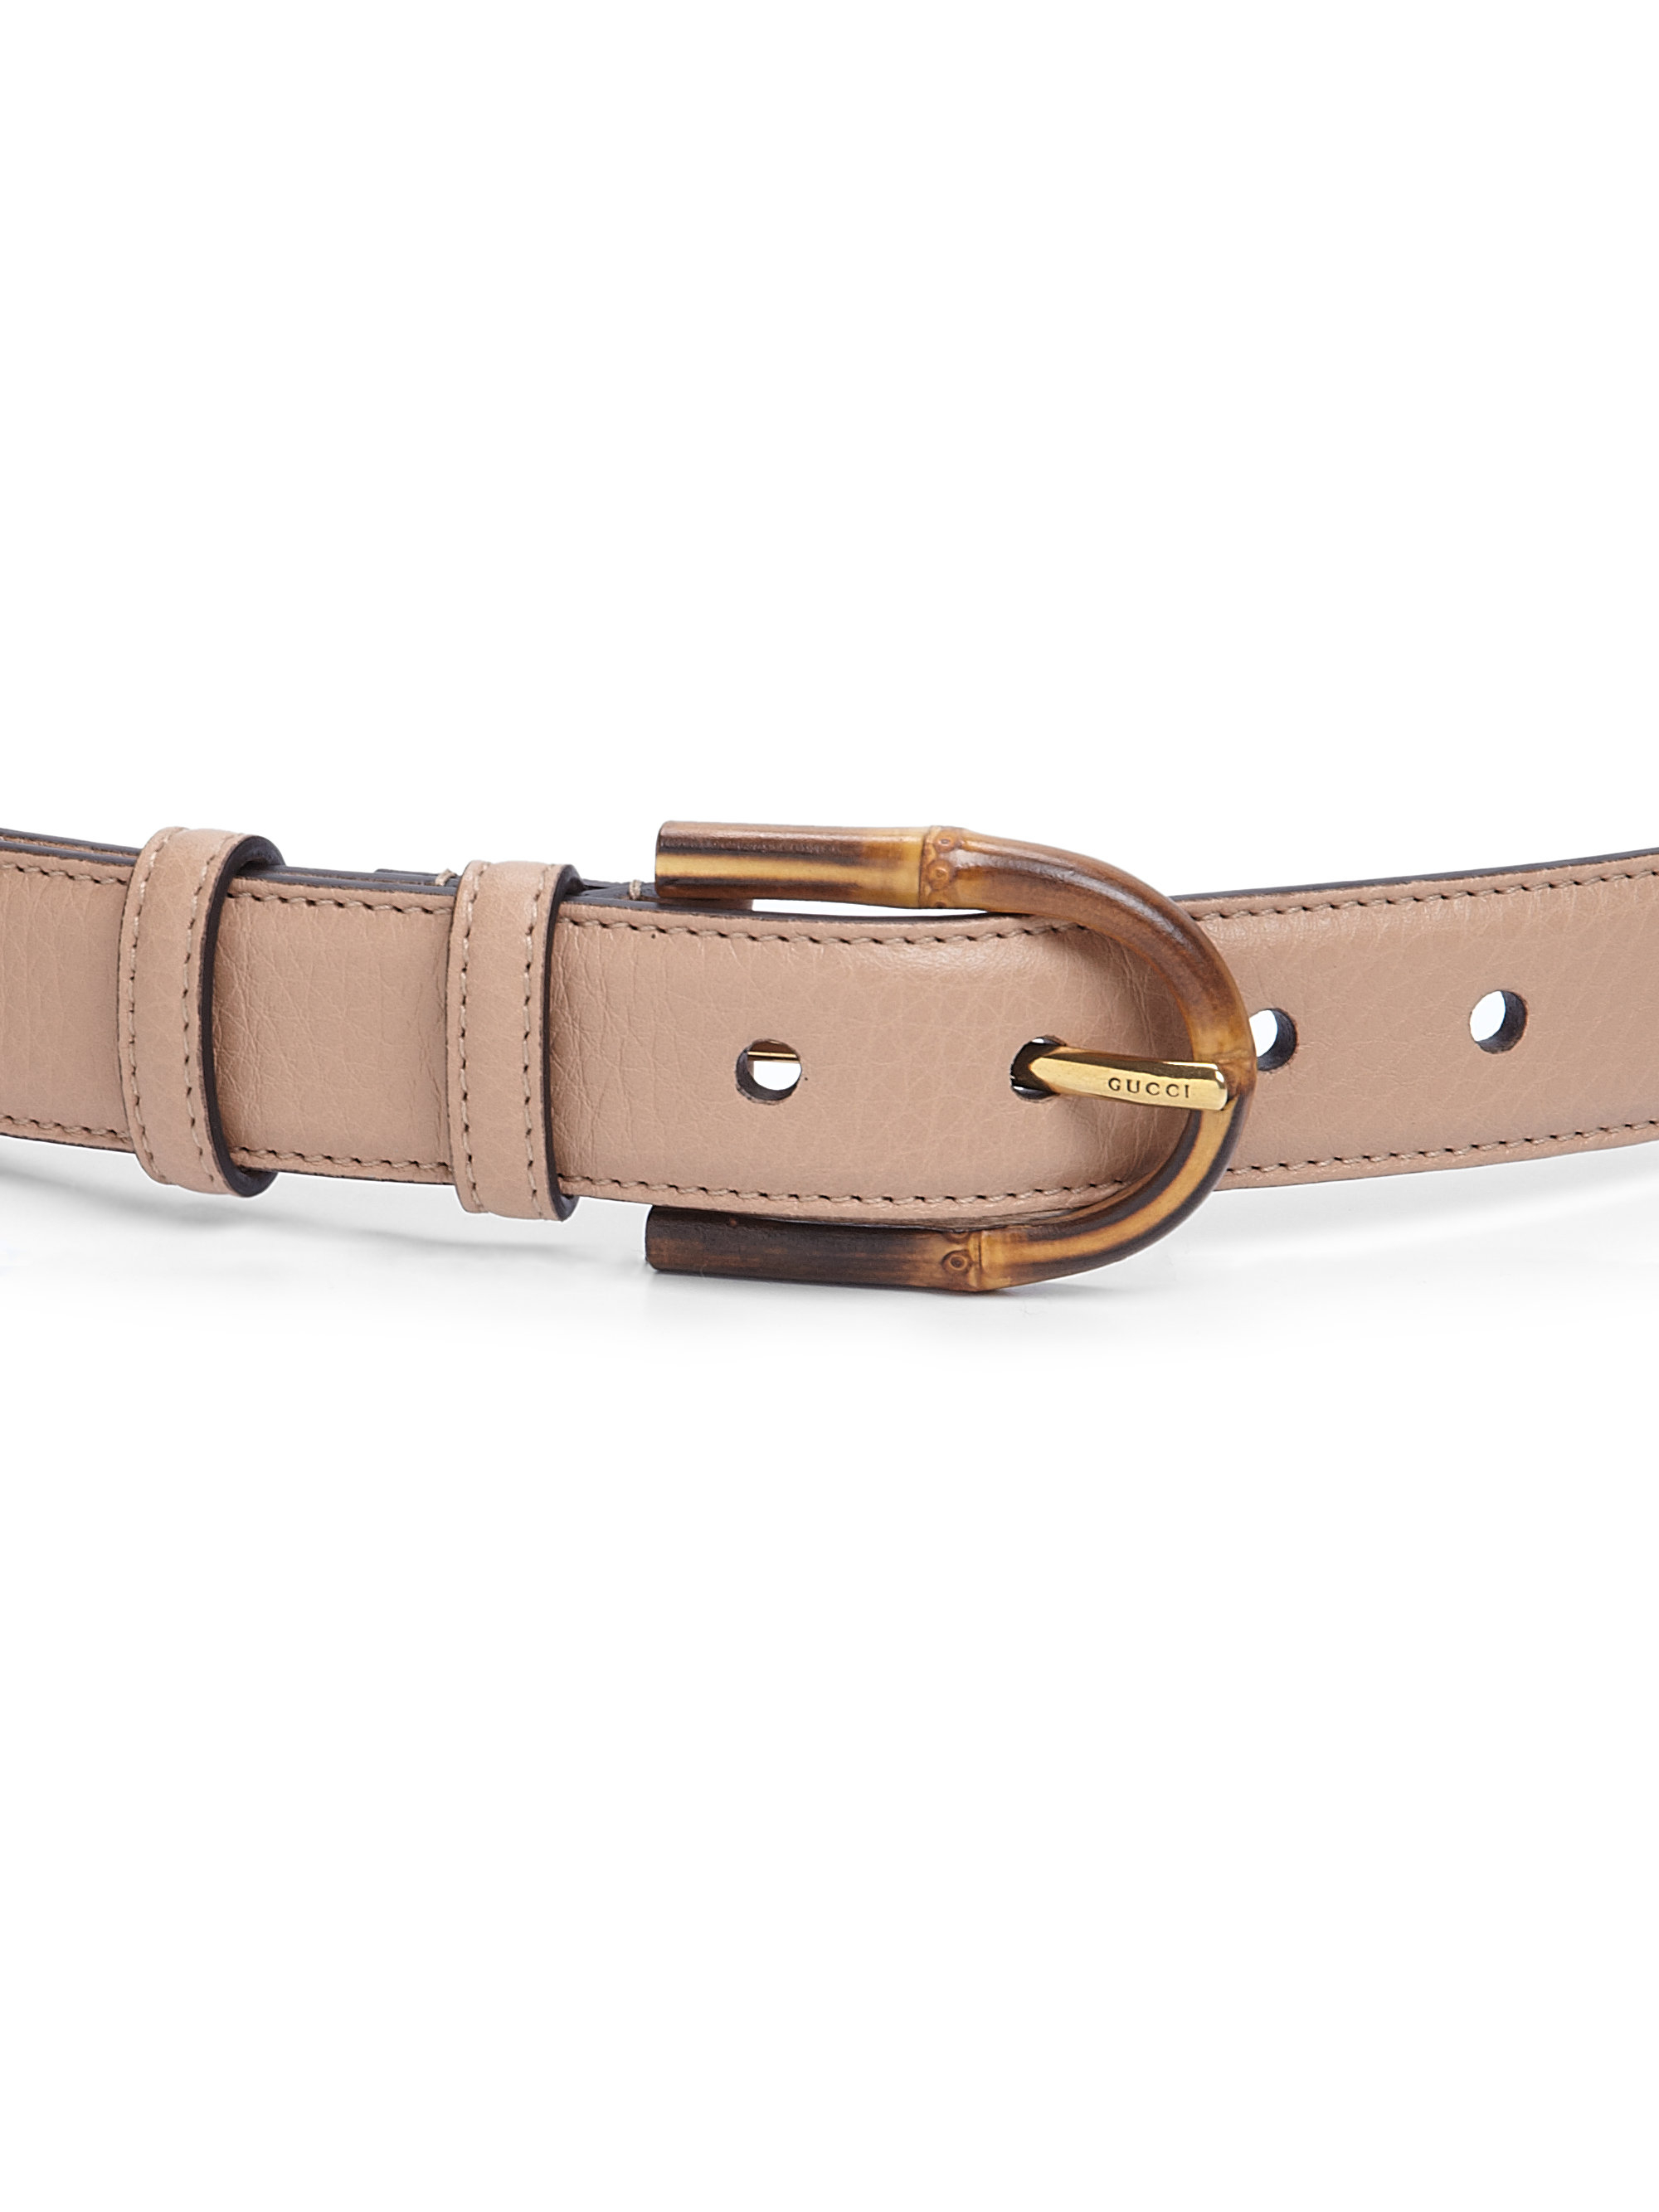 Gucci Bamboo Buckle Leather Belt in Natural for Men - Lyst